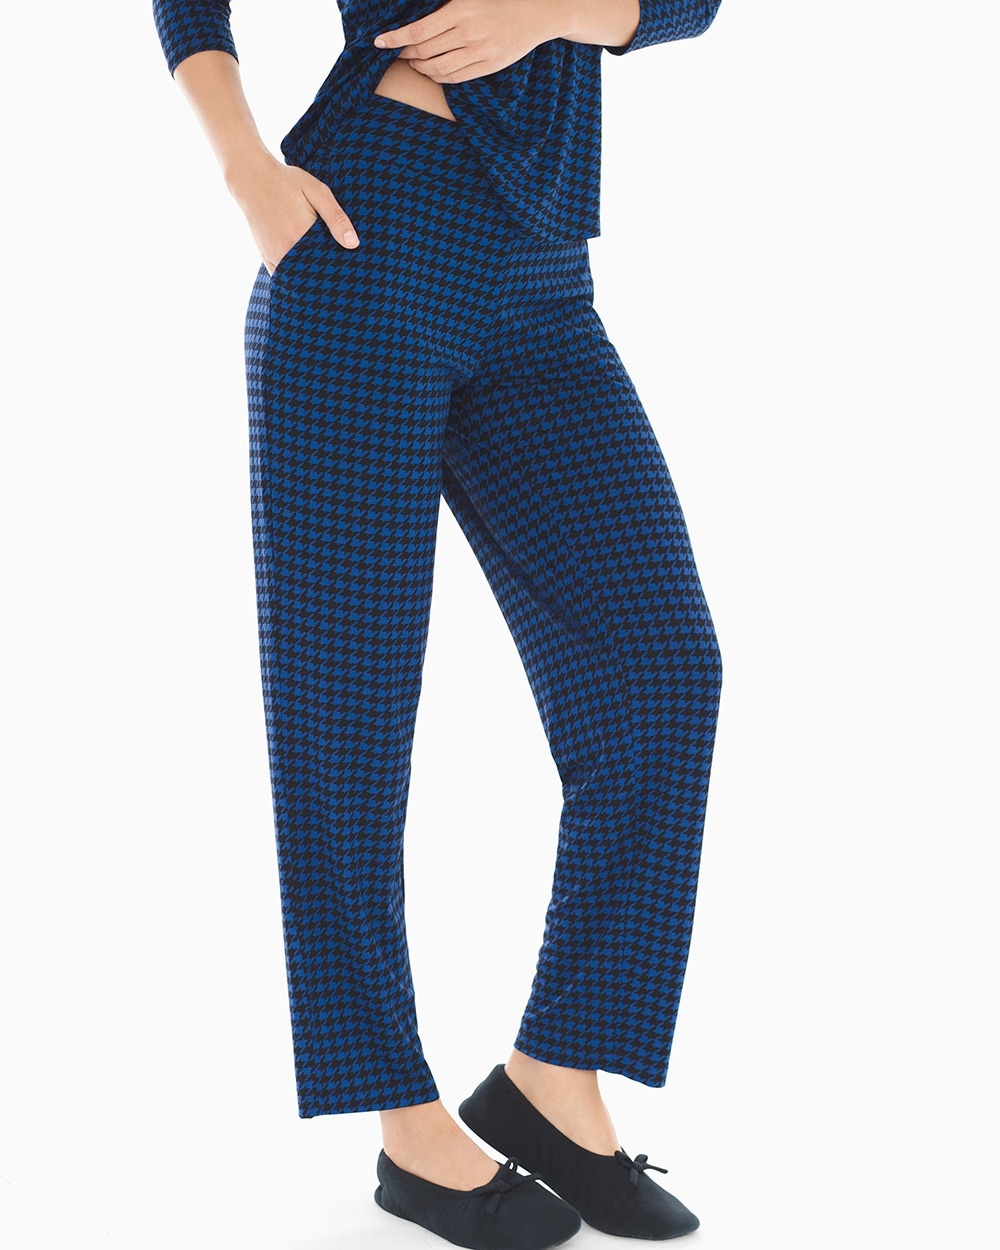 Cool Nights Ankle Pajama Pants Houndstooth Majesty